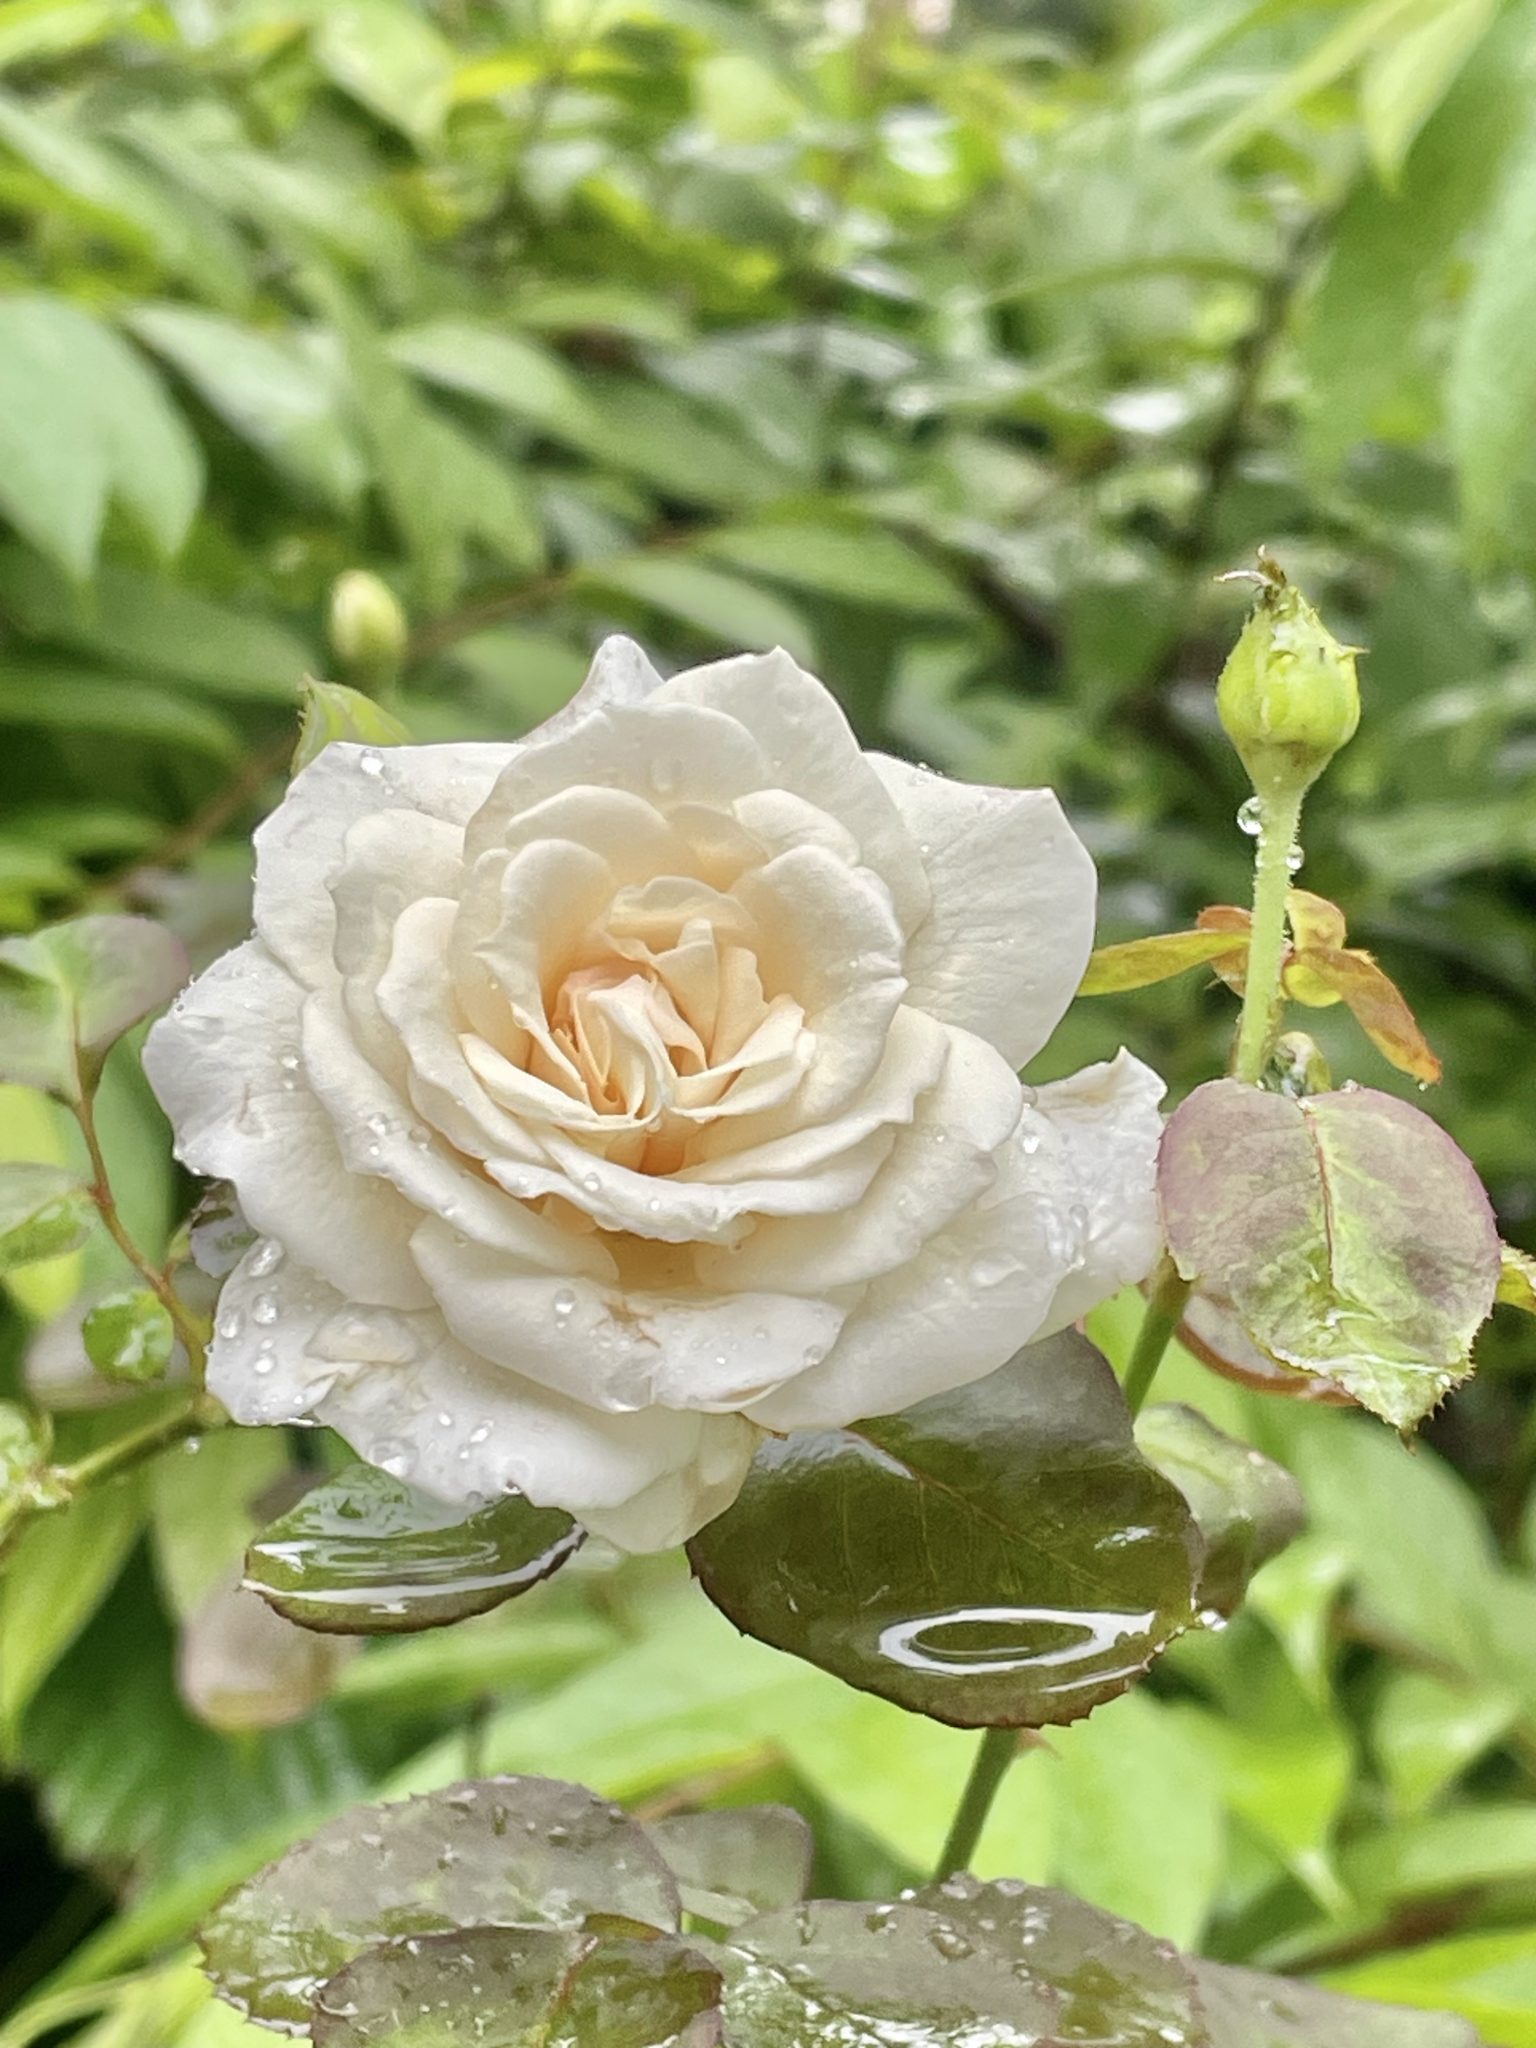 Wet white rose & bud. A Monsoon day snap from Garden.